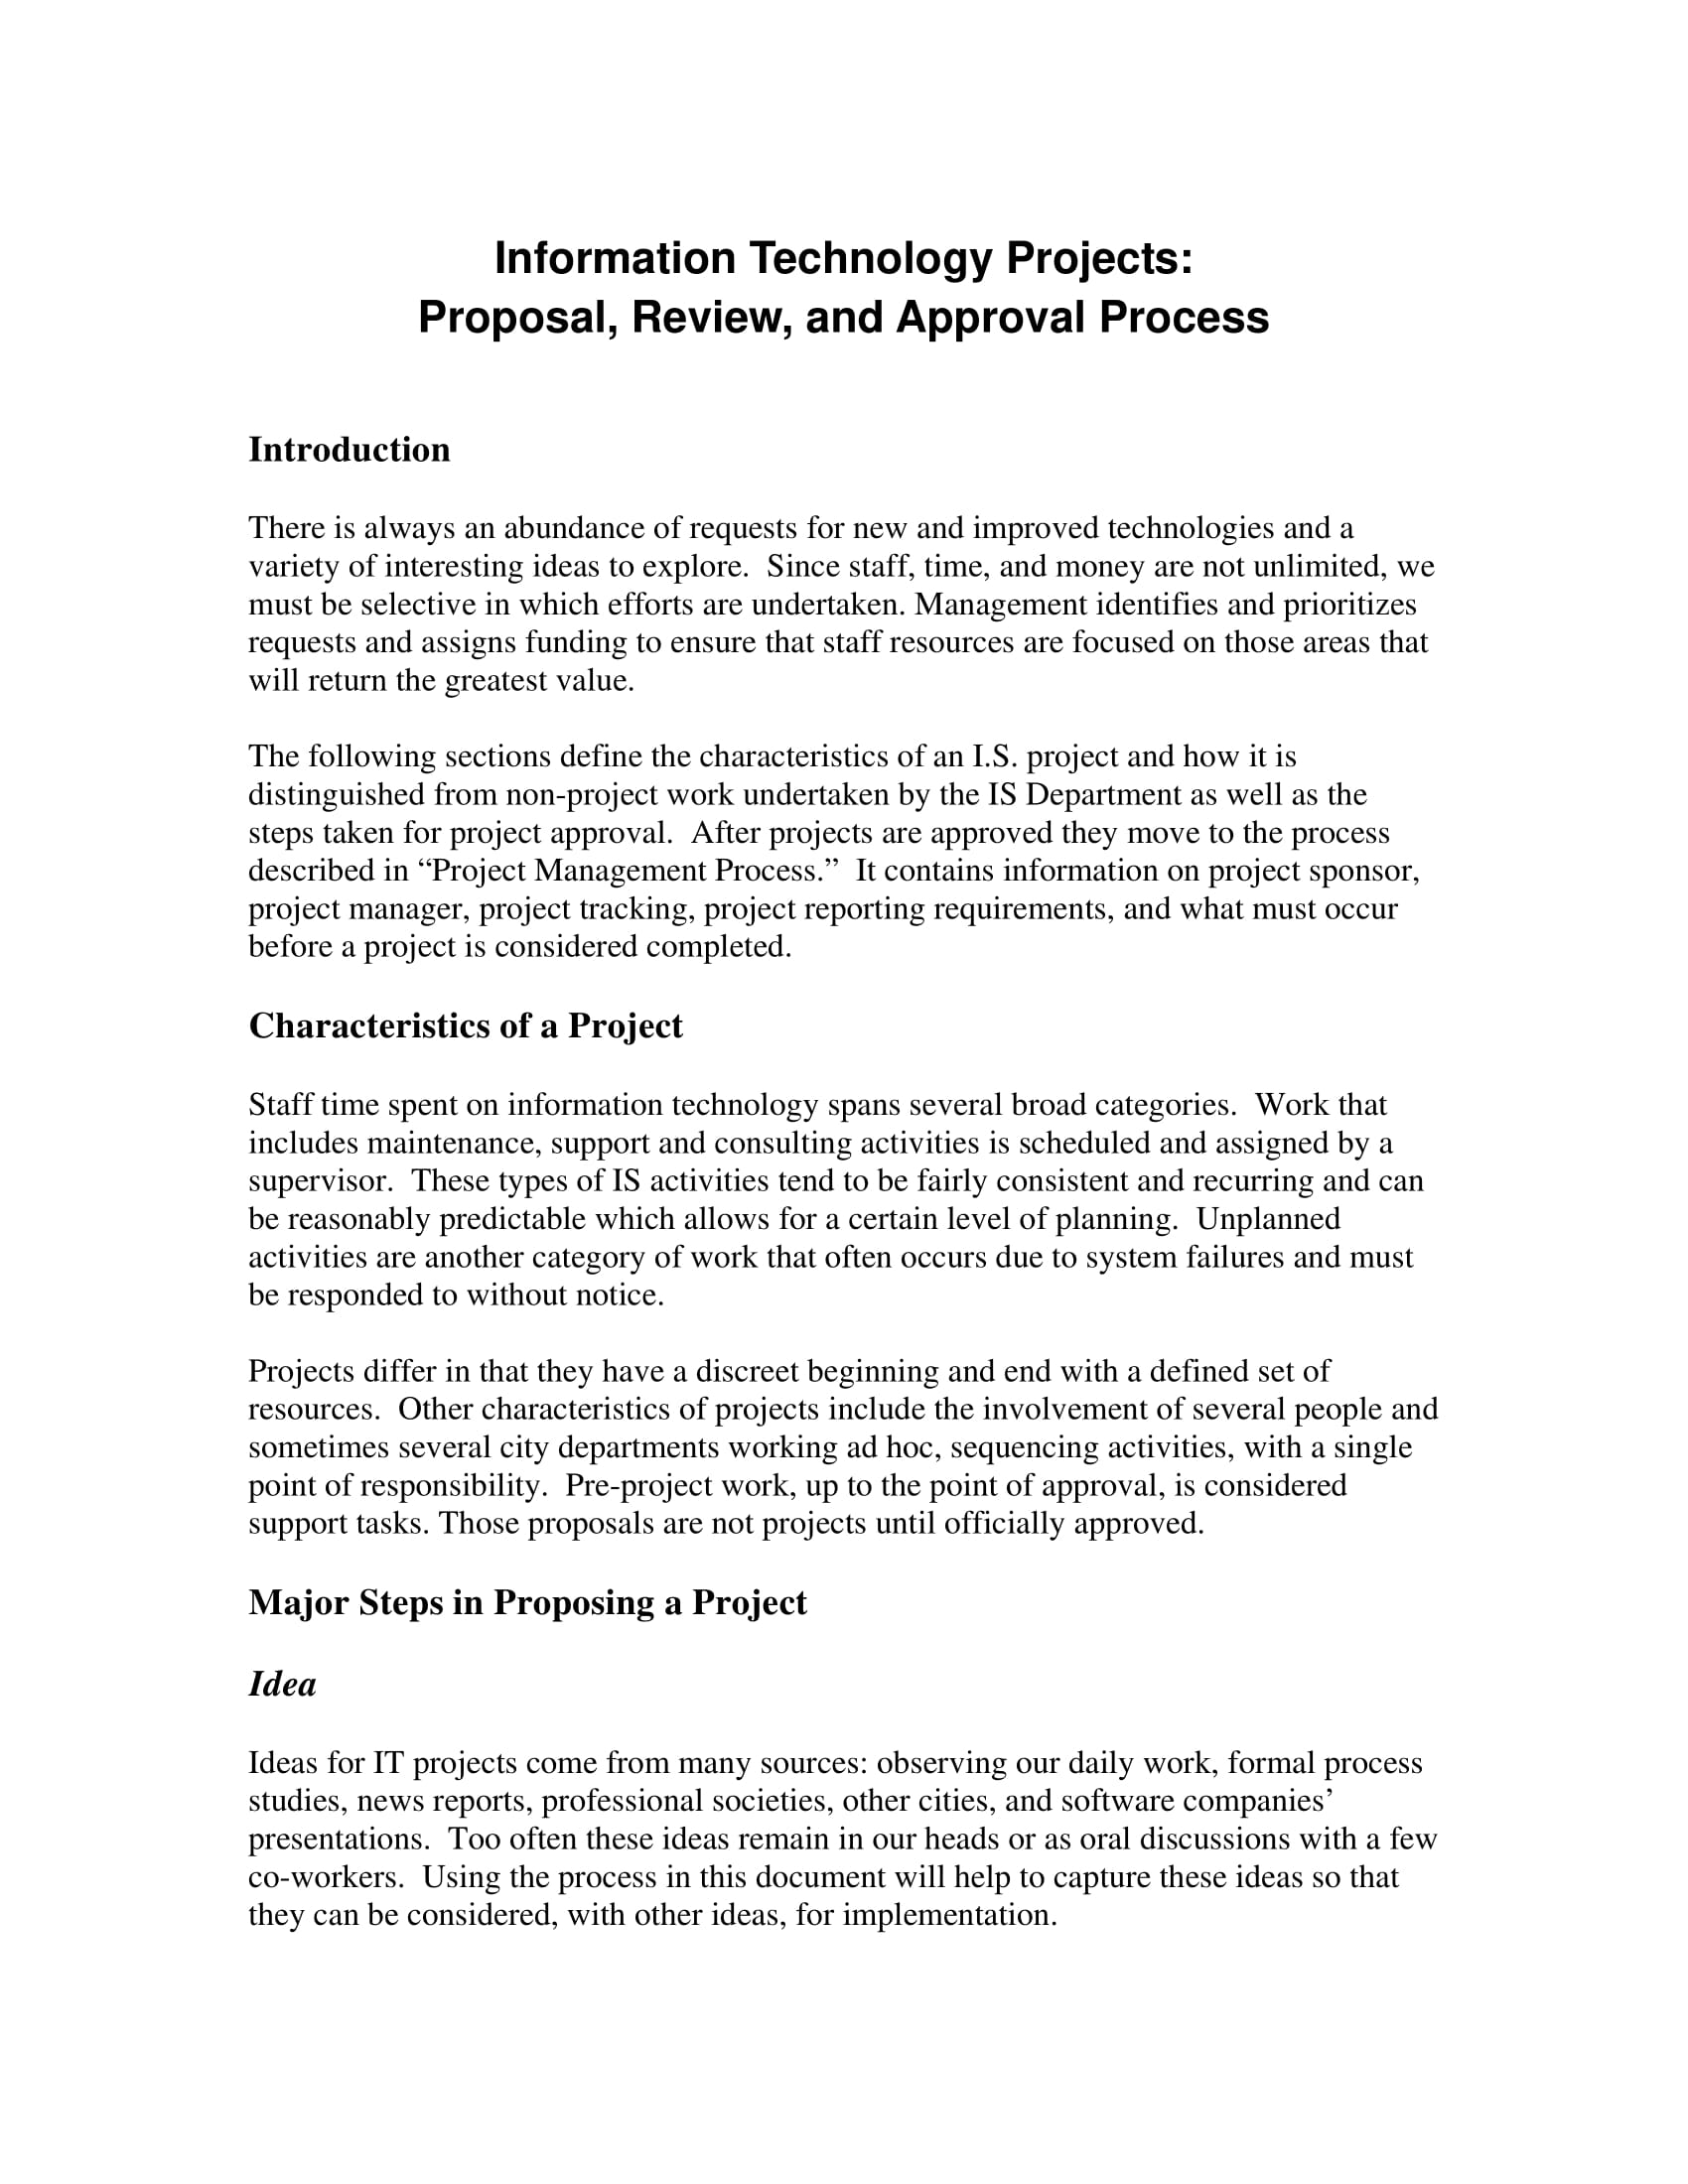 report on management proposal review and approval of information technology projects example 1